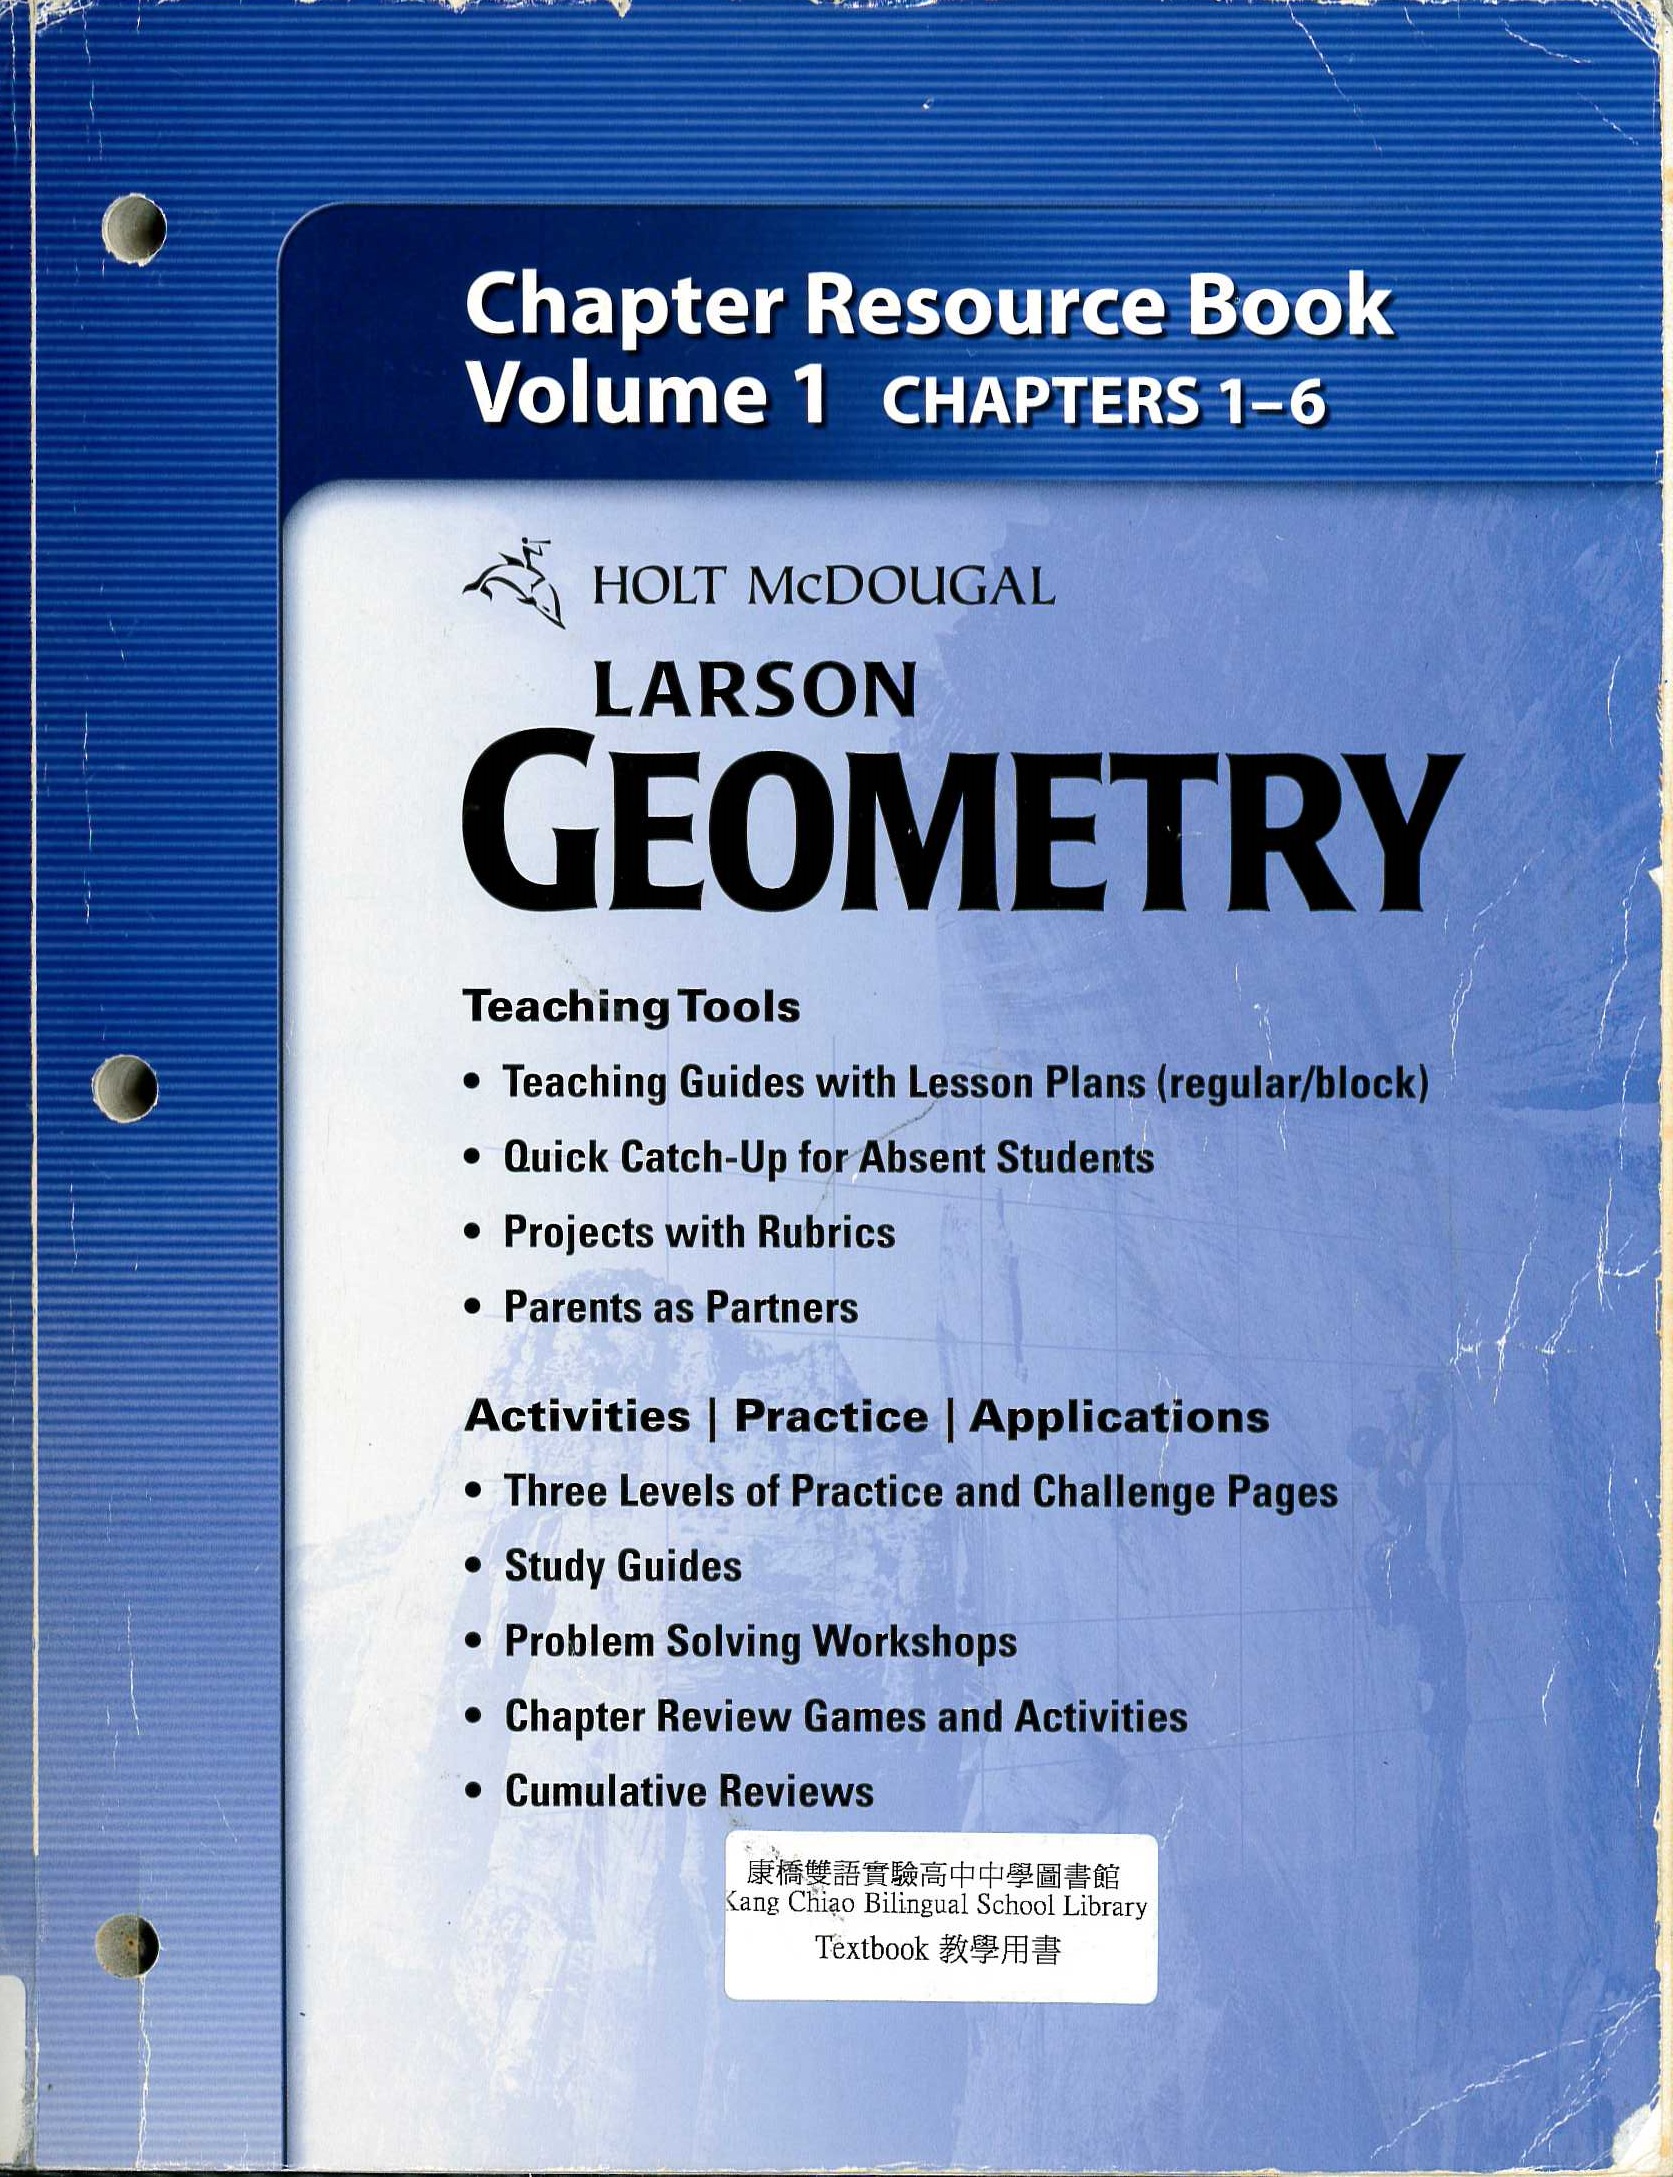 Holt McDougal geometry  : chapter resource book[1] (Chapter 1-6)